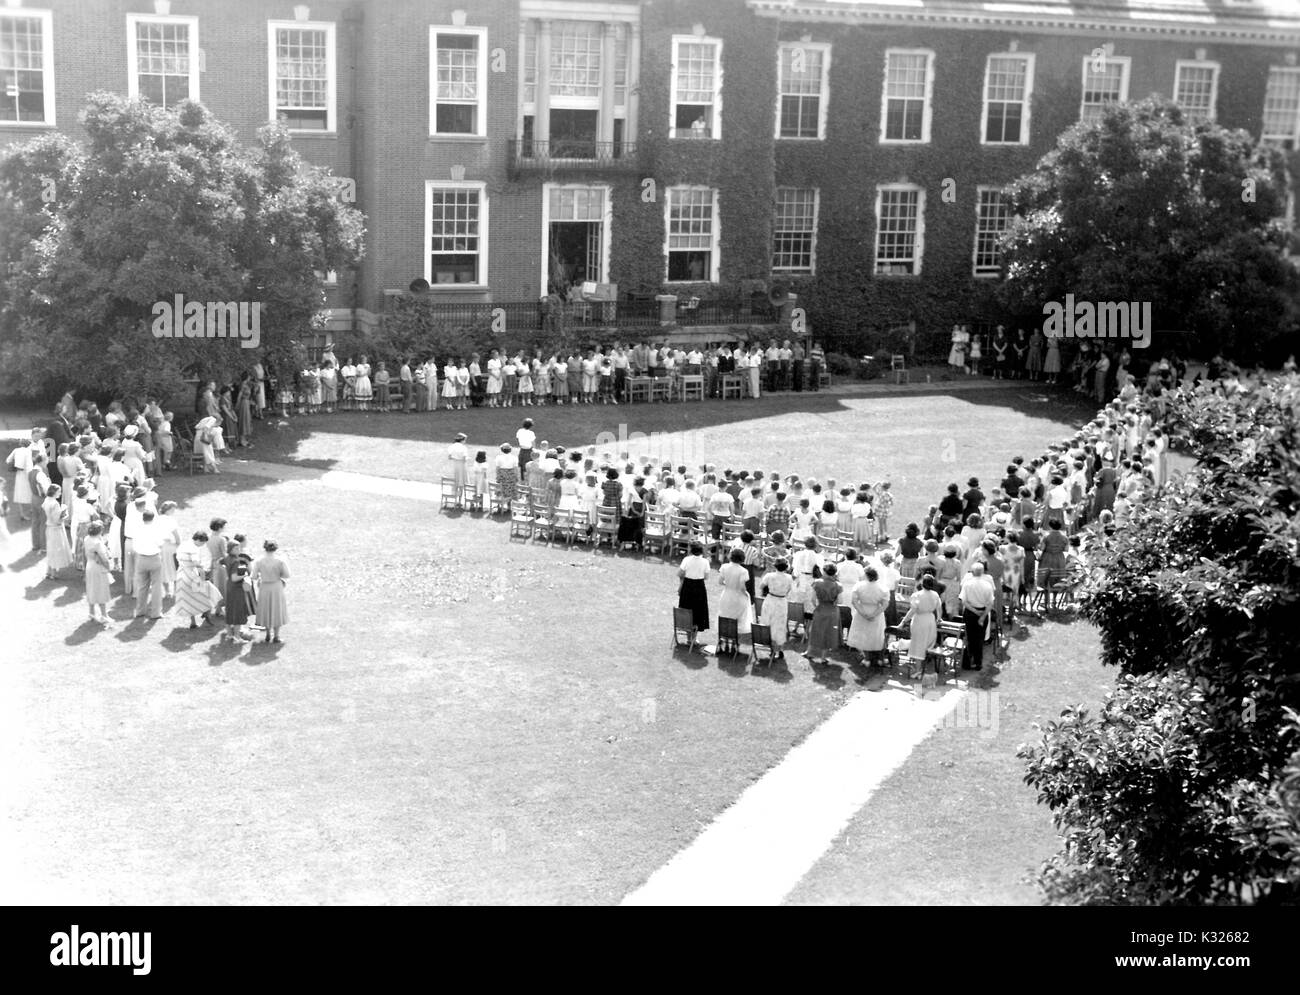 At the end of the school year for a demonstration school at Johns Hopkins University, parents and teachers stand in front of rows of chairs outside of an ivy-covered campus building, waiting for the young boys and girls to begin the show they will perform to close out the year, in the grass on the quadrangle on a sunny day, Baltimore, Maryland, July, 1950. Stock Photo